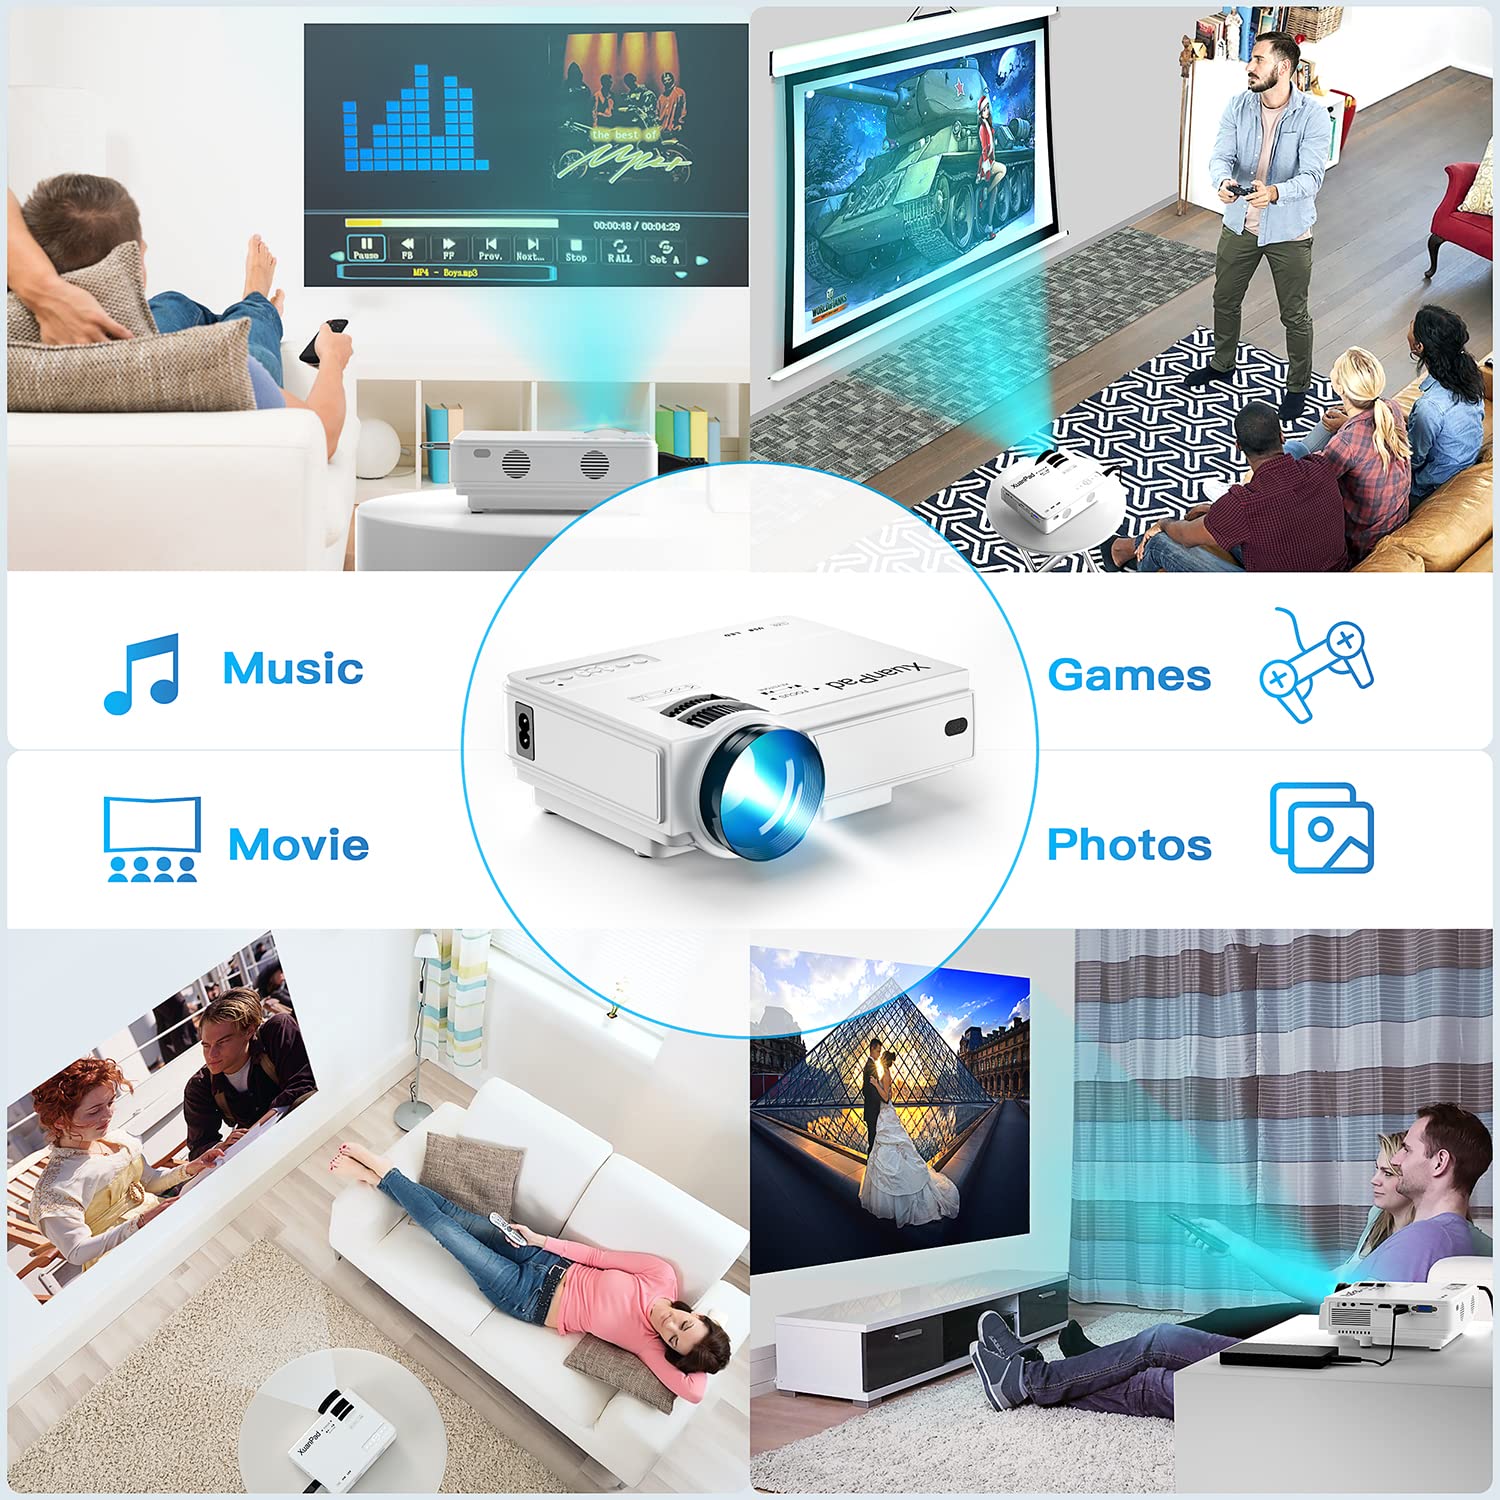 Projector, XuanPad 2023 Upgraded Mini Projector, Video Projector HD 1080P Supported, Portable Home Projector Compatible with TV Stick, HDMI, USB, Laptop, iPhone, Android for Home Entertainment